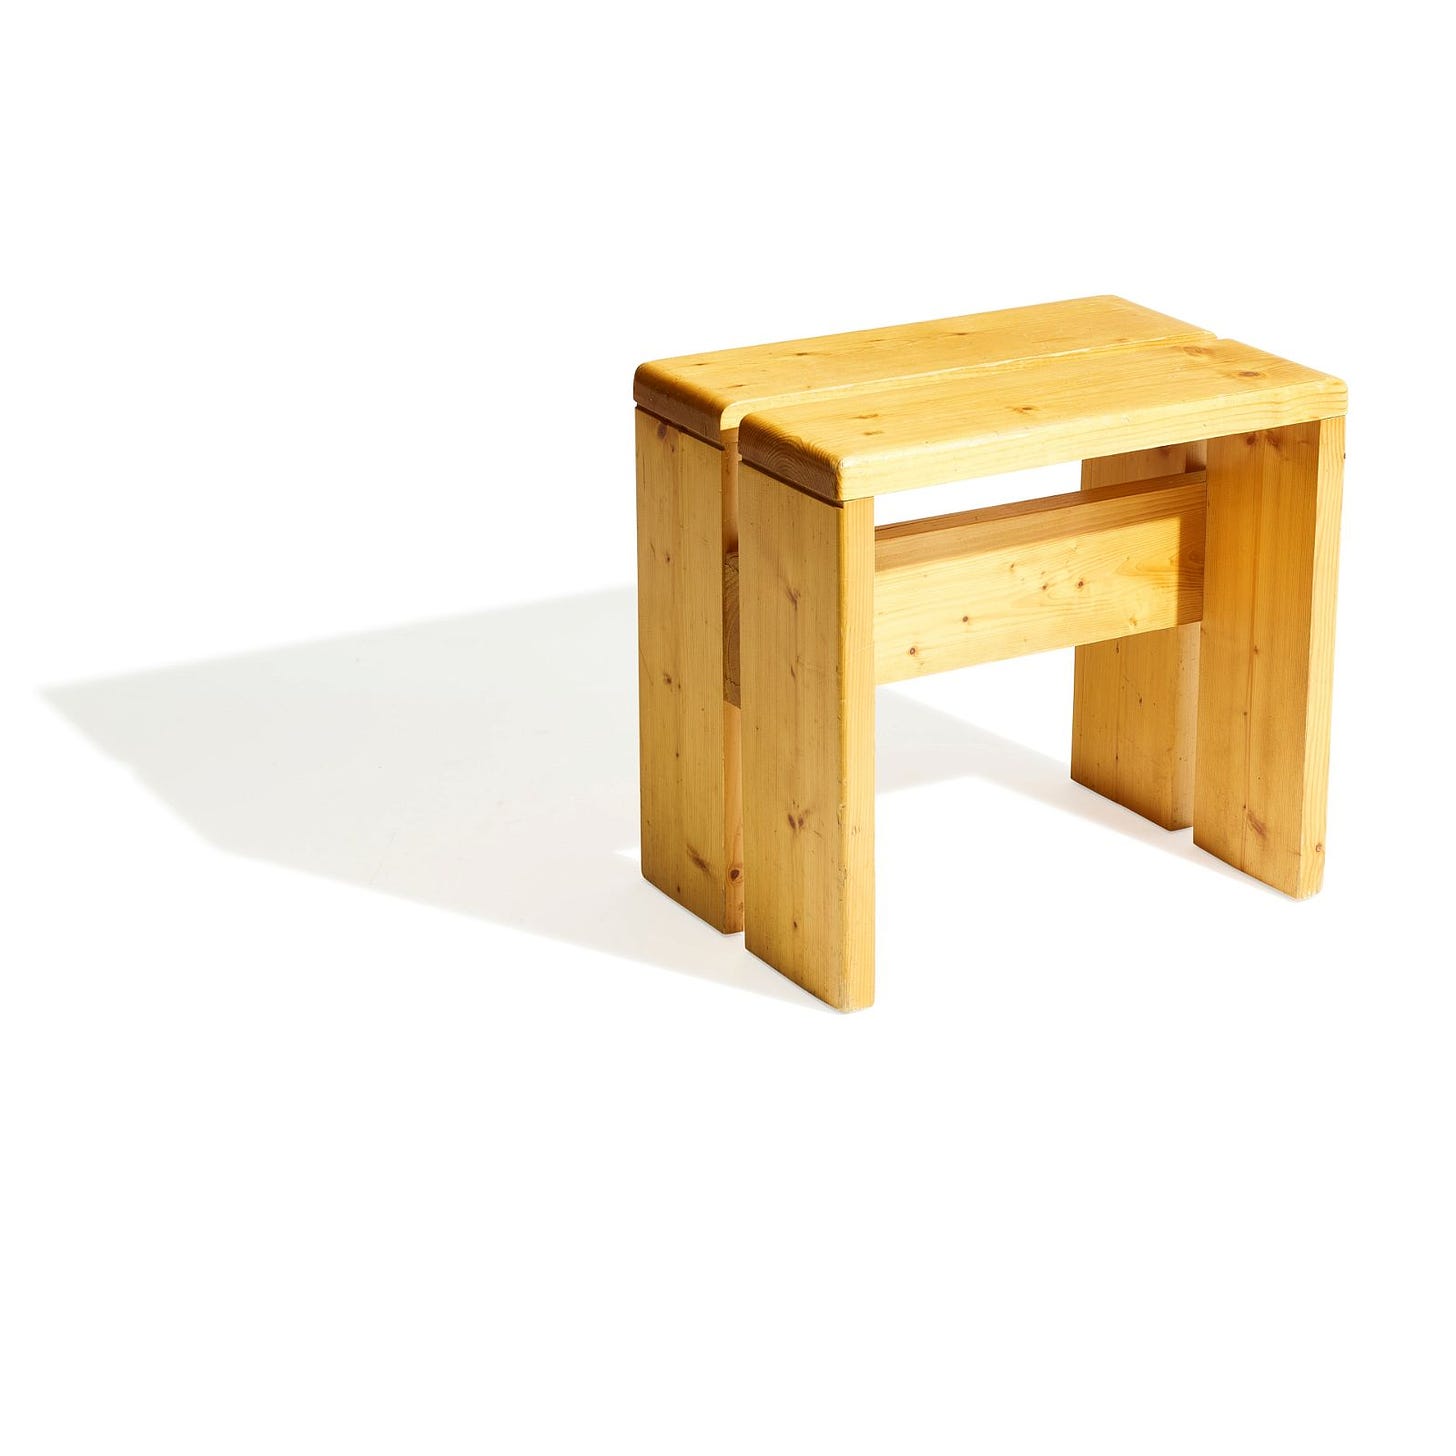 CHARLOTTE PERRIAND (1903-1999) Les Arcs Stool1960spineheight 16 1/2in (42cm); width 17 3/4in (45...